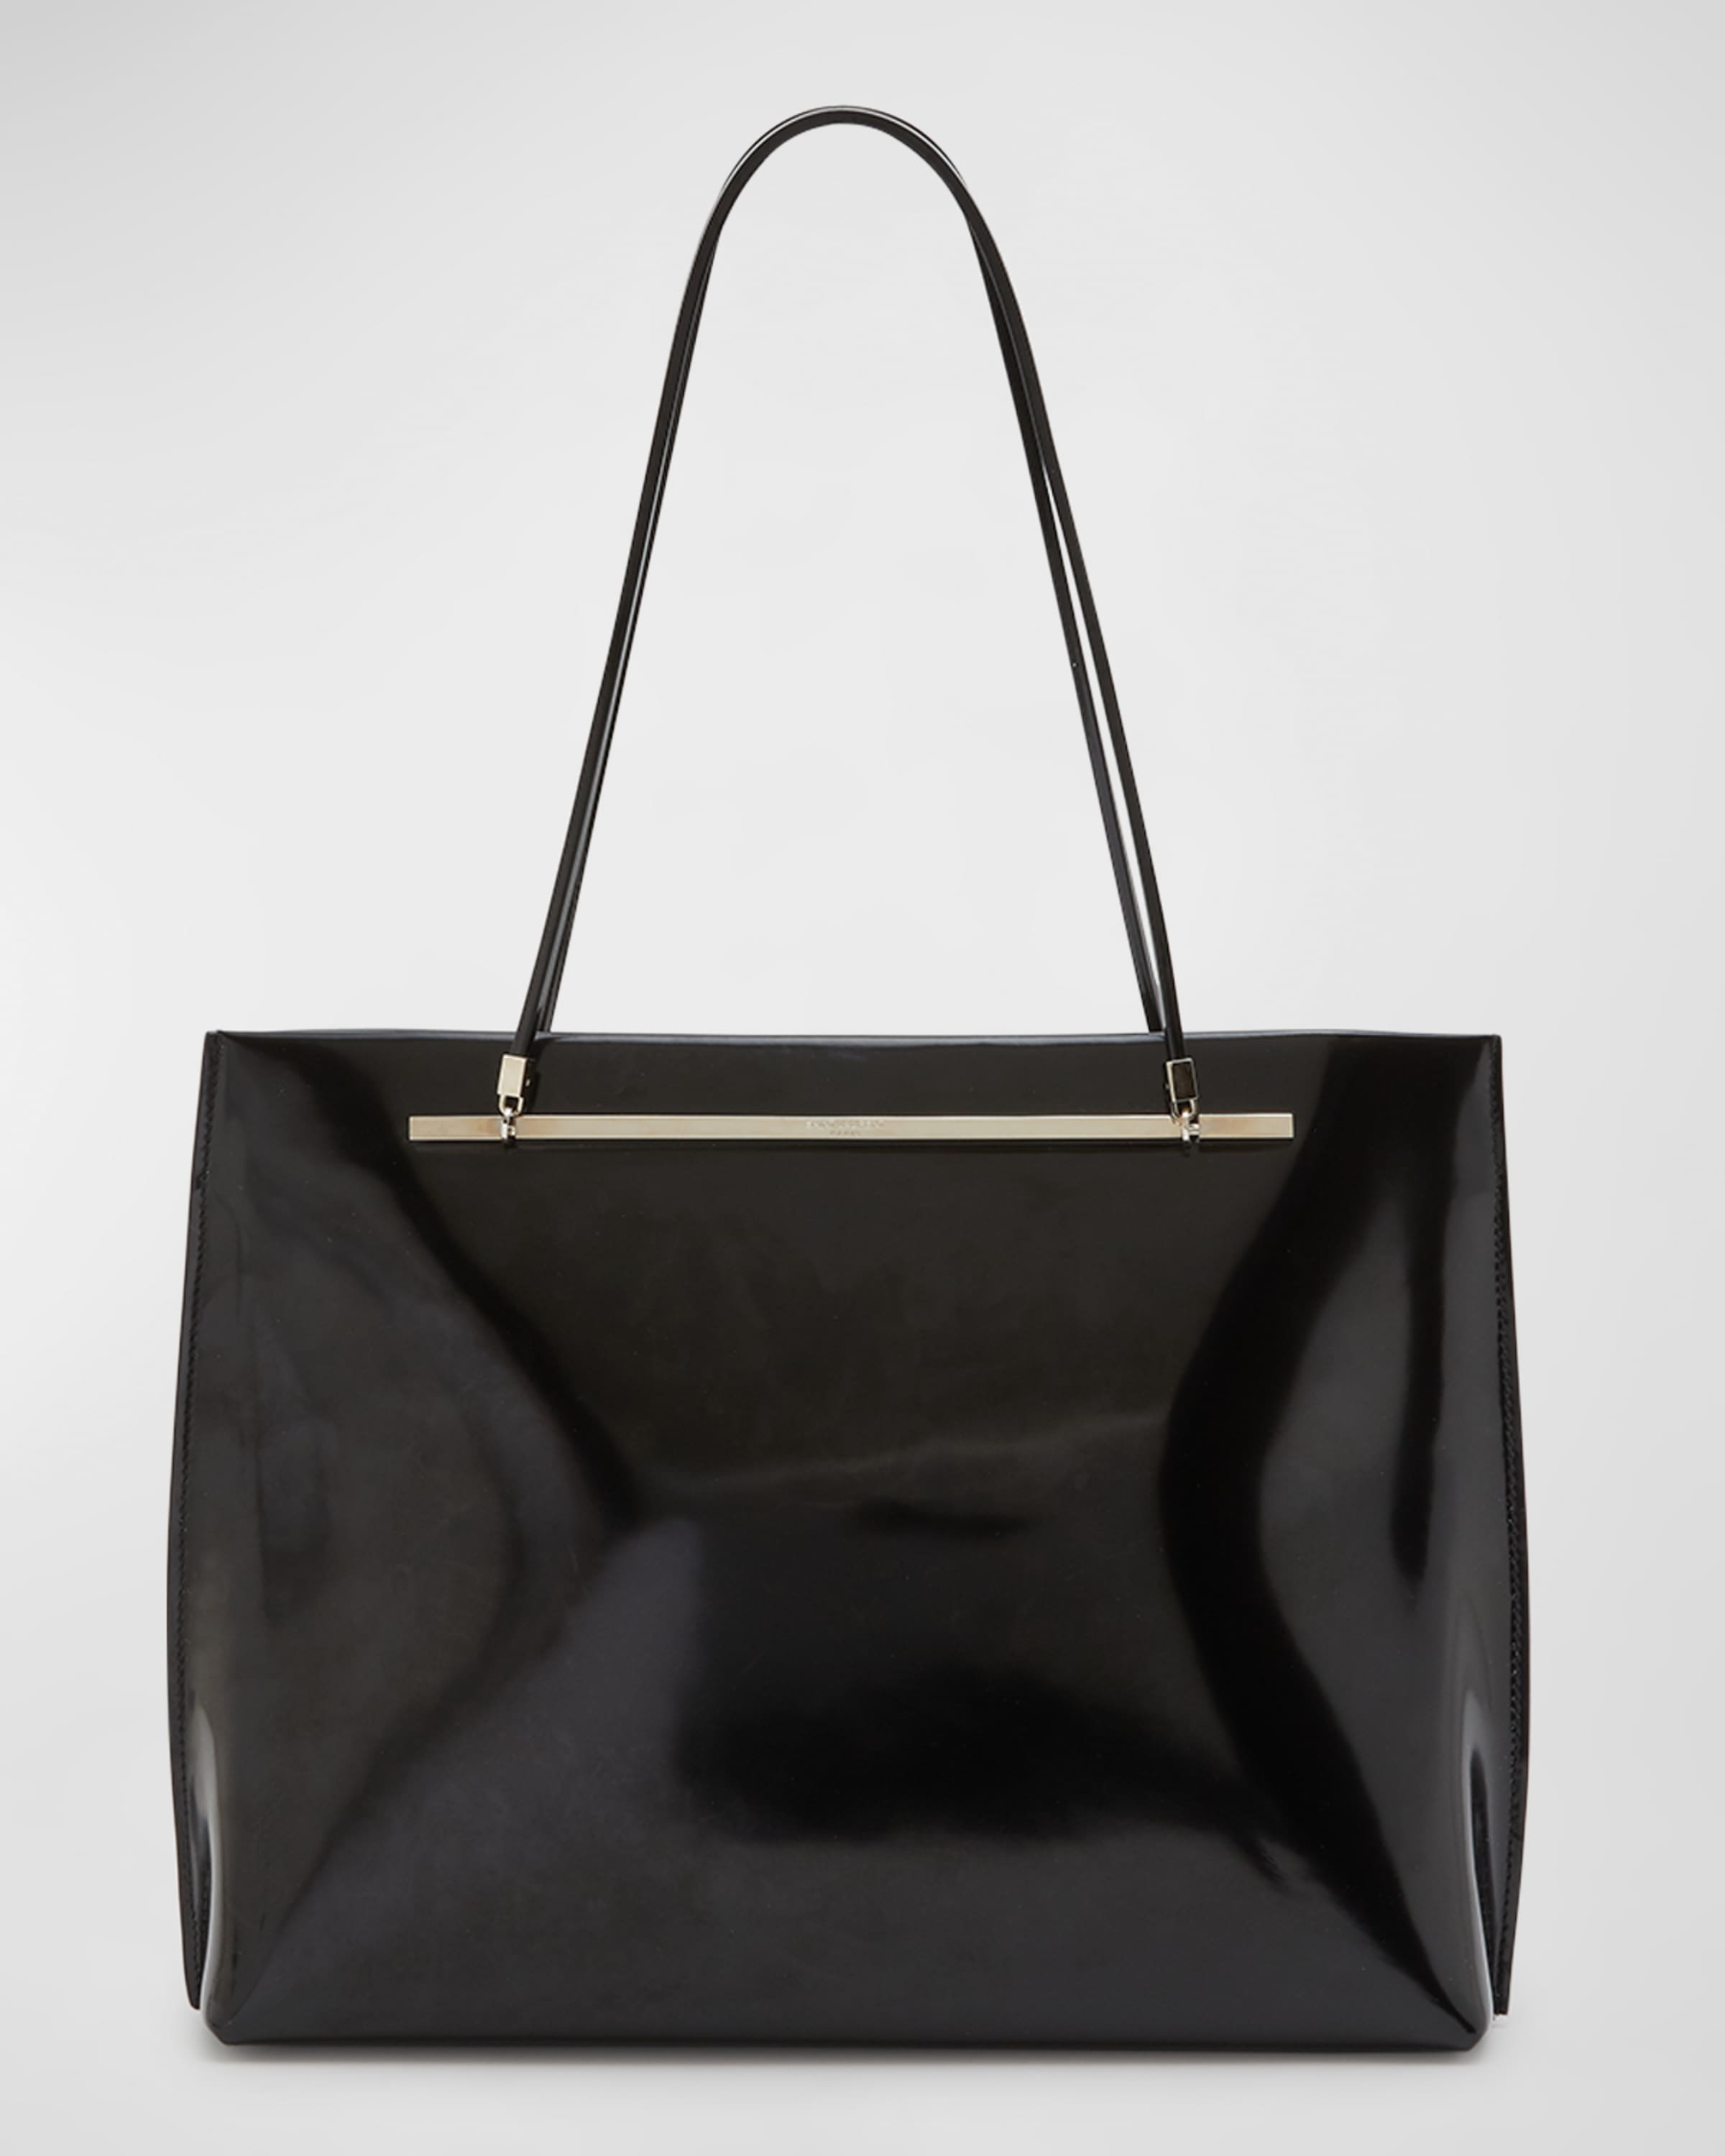 SAINT LAURENT Suzanne Leather Shopping Tote Bag, neimanmarcus